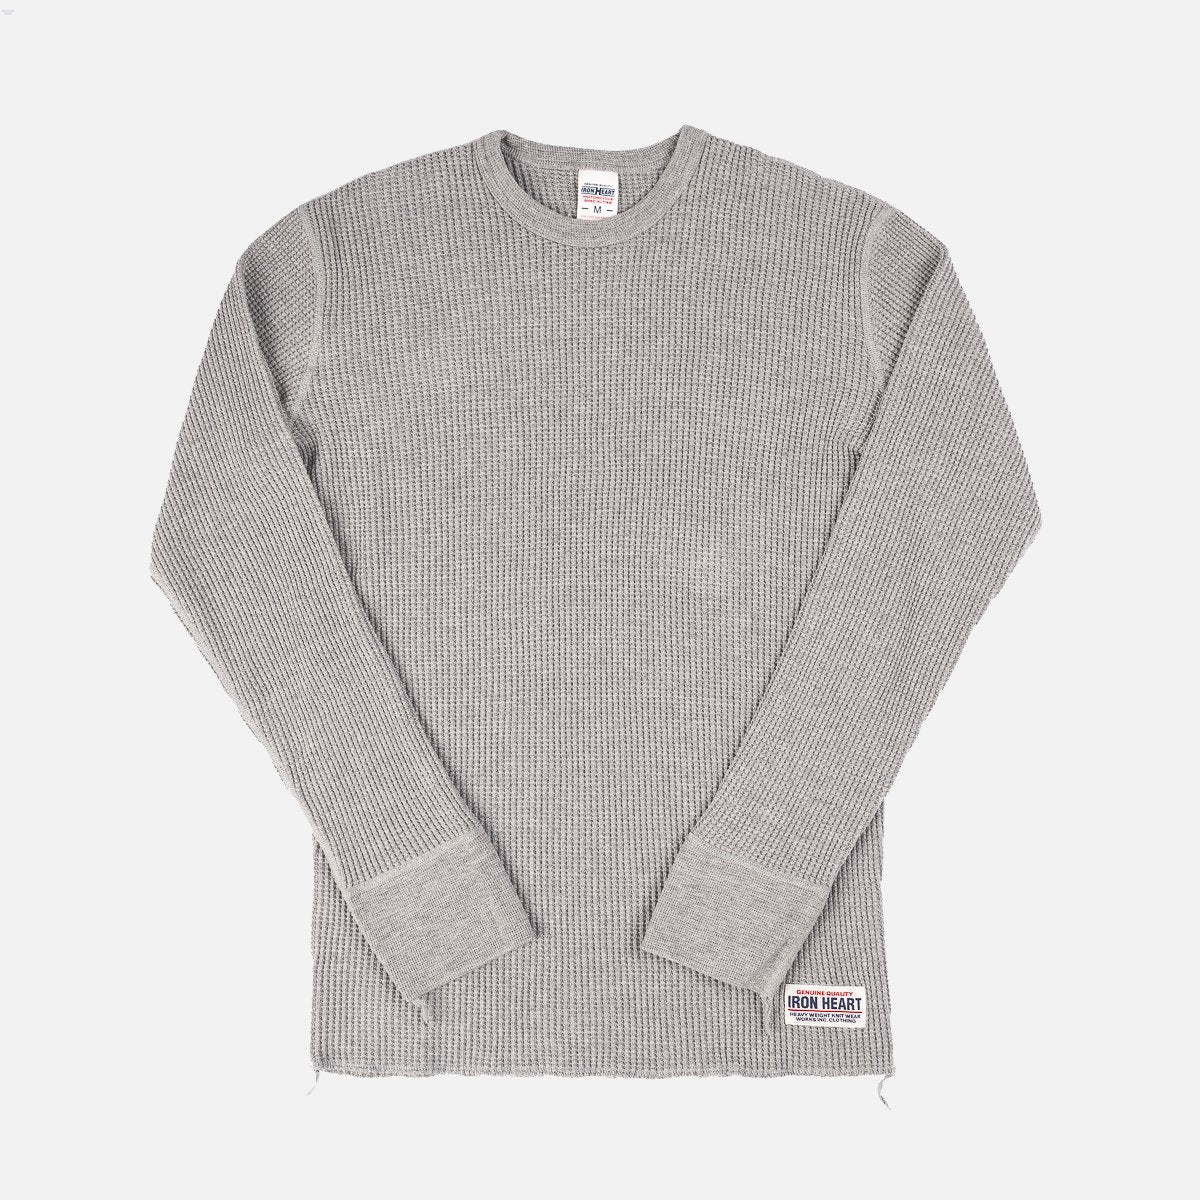 Iron Heart - IHTL-1301-GRY - Waffle Knit Crew Neck Thermal - Grey